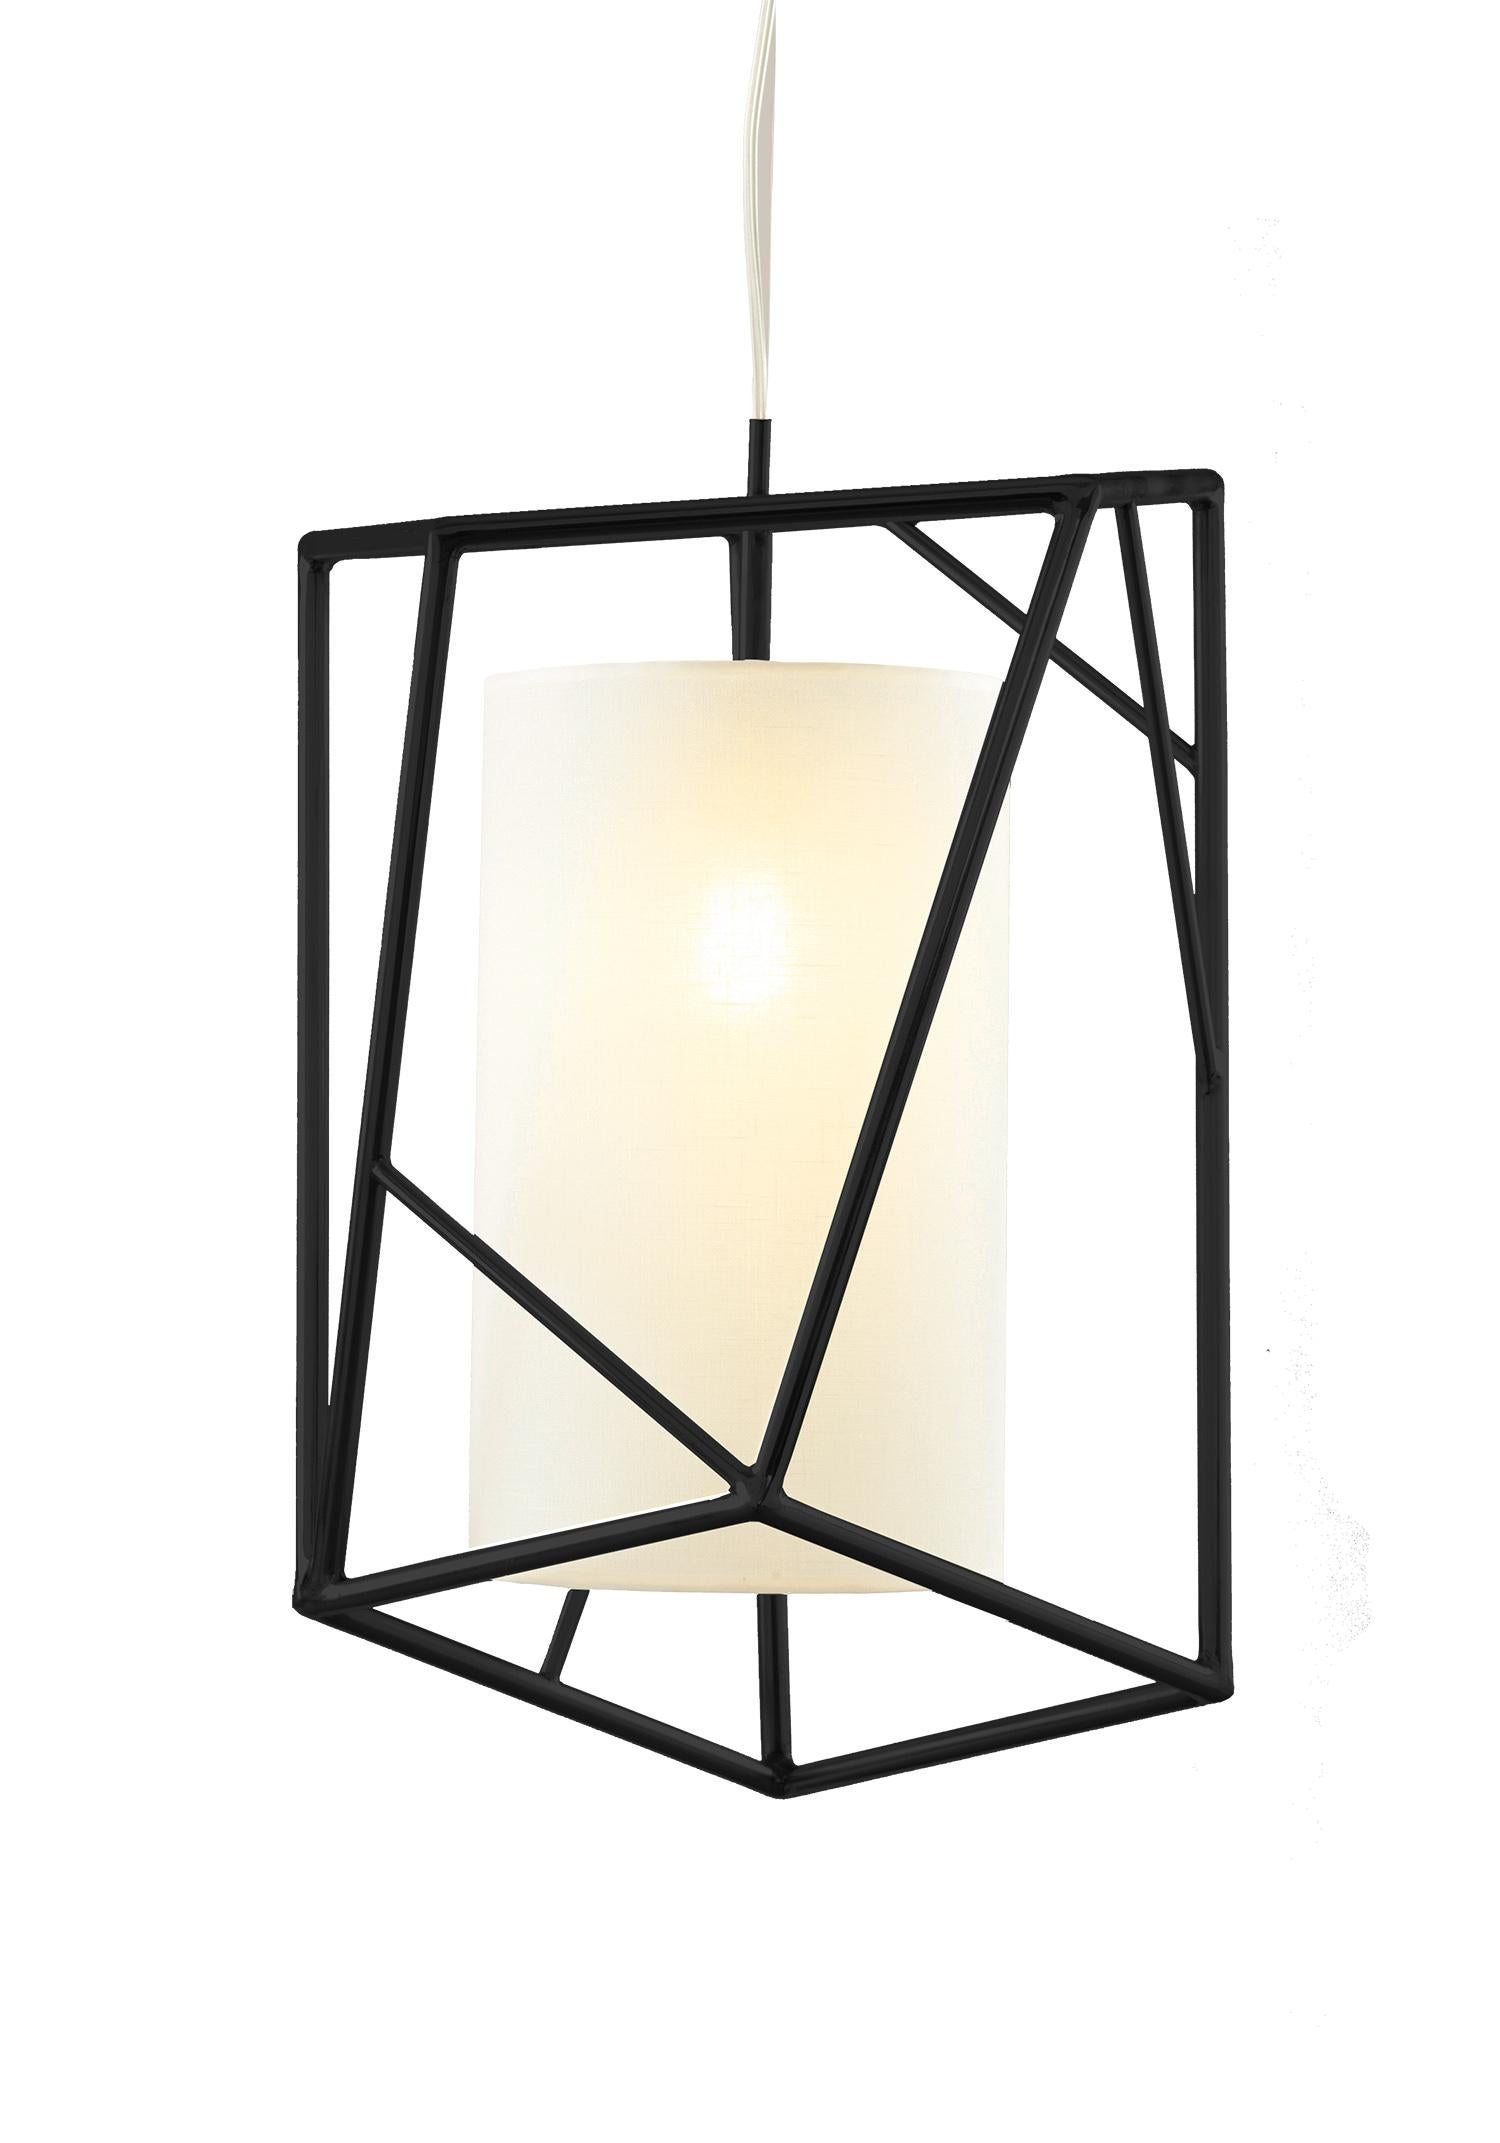 A game between balance and light. Its shape is unexpected while built with geometric segments but organic as a wholei an elegant Chandelier.
Star III Pendant Lamp makes a statement in any space, whether it's one of tradition and elegance or